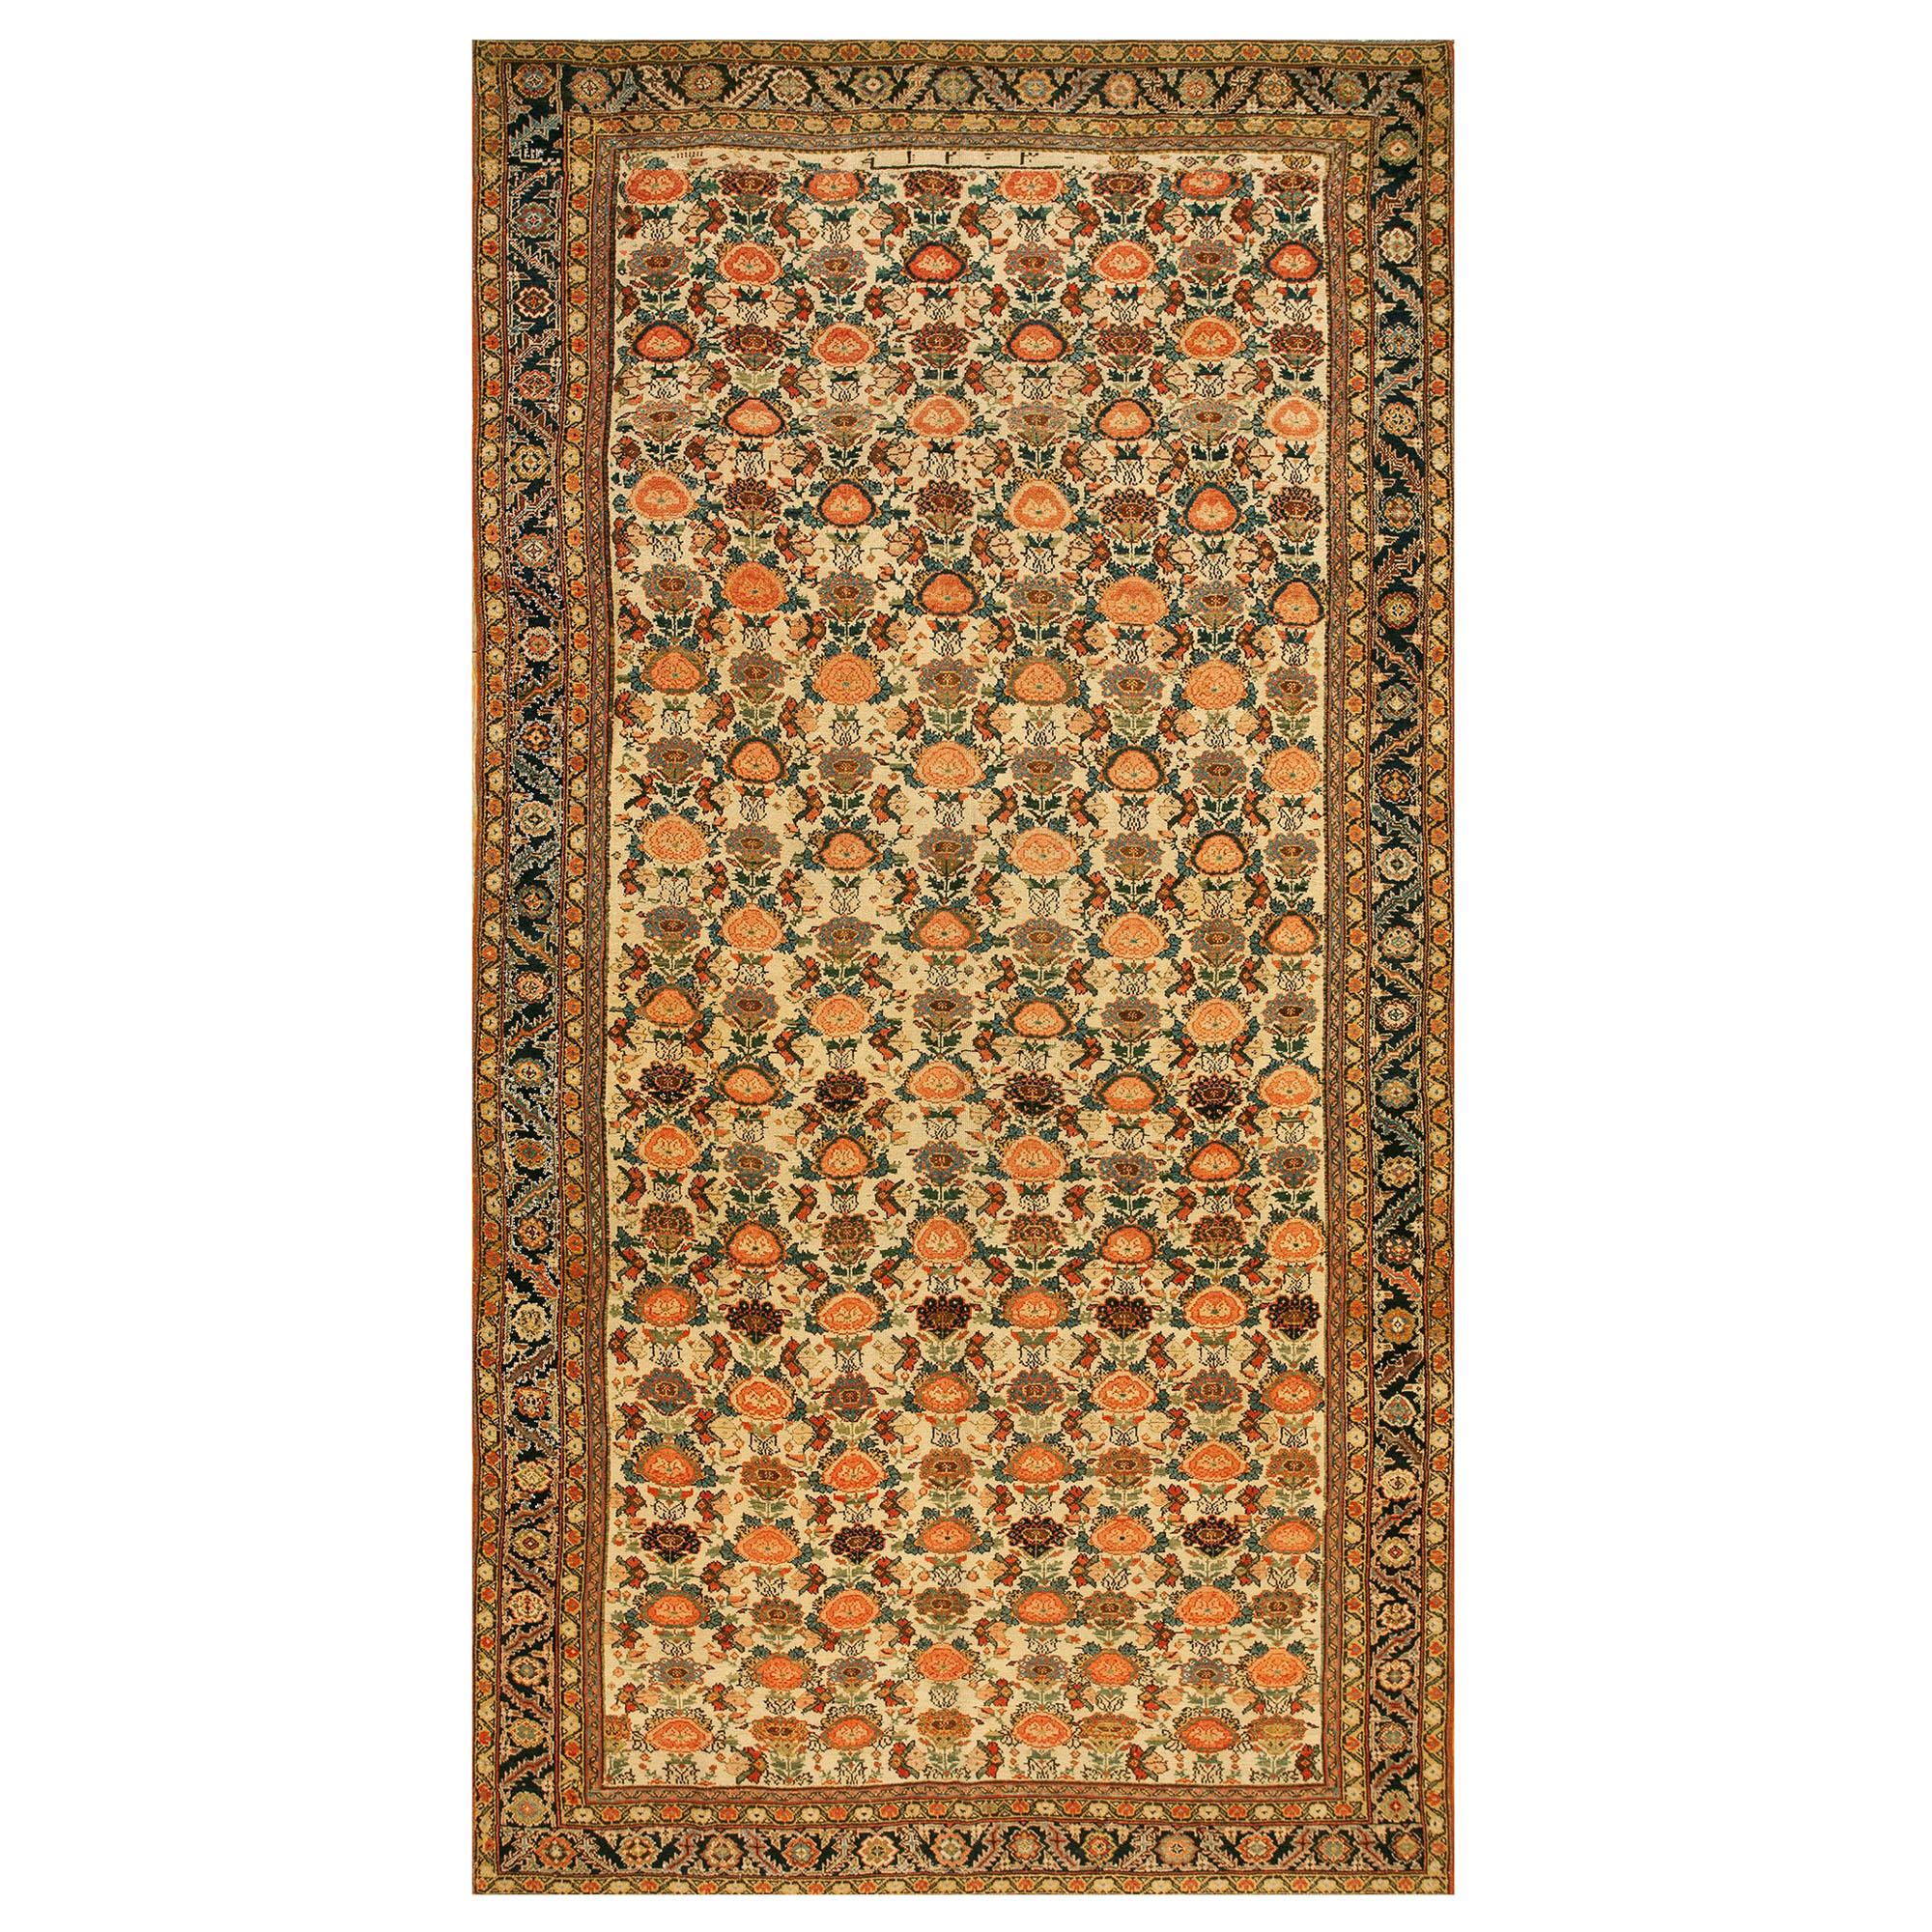 Early 19th Century N.W. Persian Carpet ( 7' x 12'6" - 213 x 381 ) For Sale